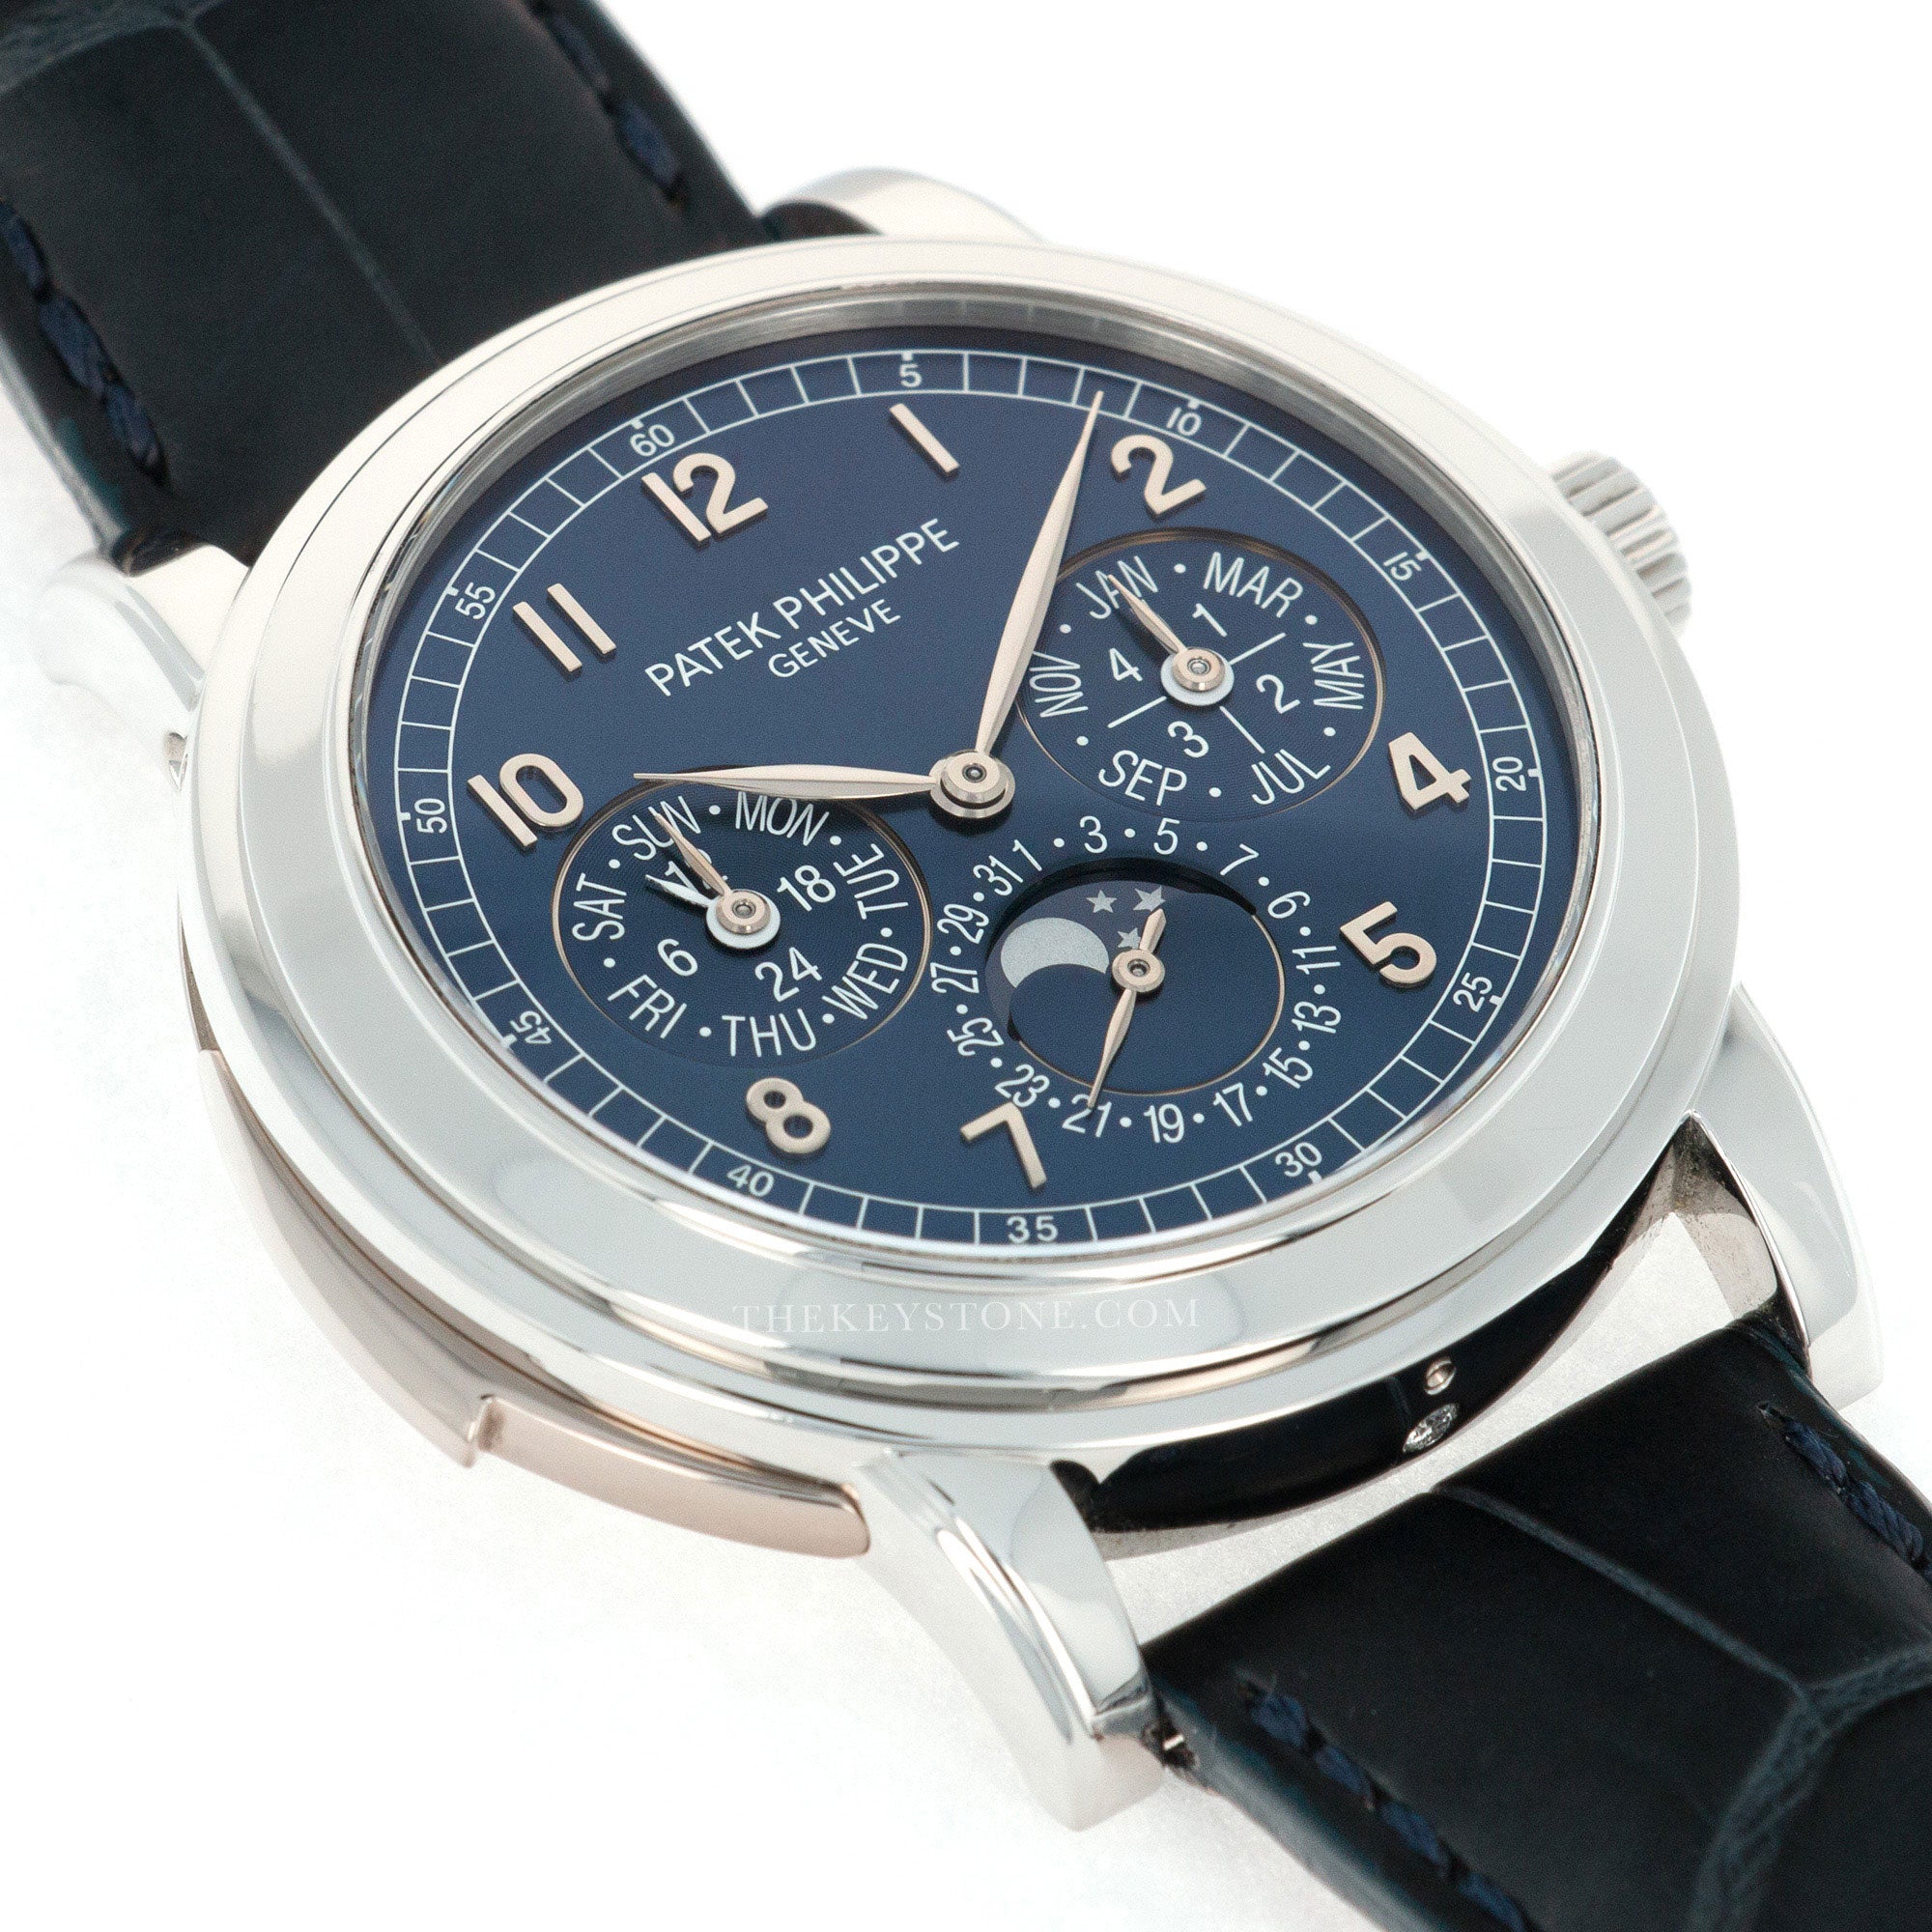 Patek Philippe - Patek Philippe Platinum Perpetual Calendar Minute Repeater Watch Ref. 5074, One of Only Two Known - The Keystone Watches